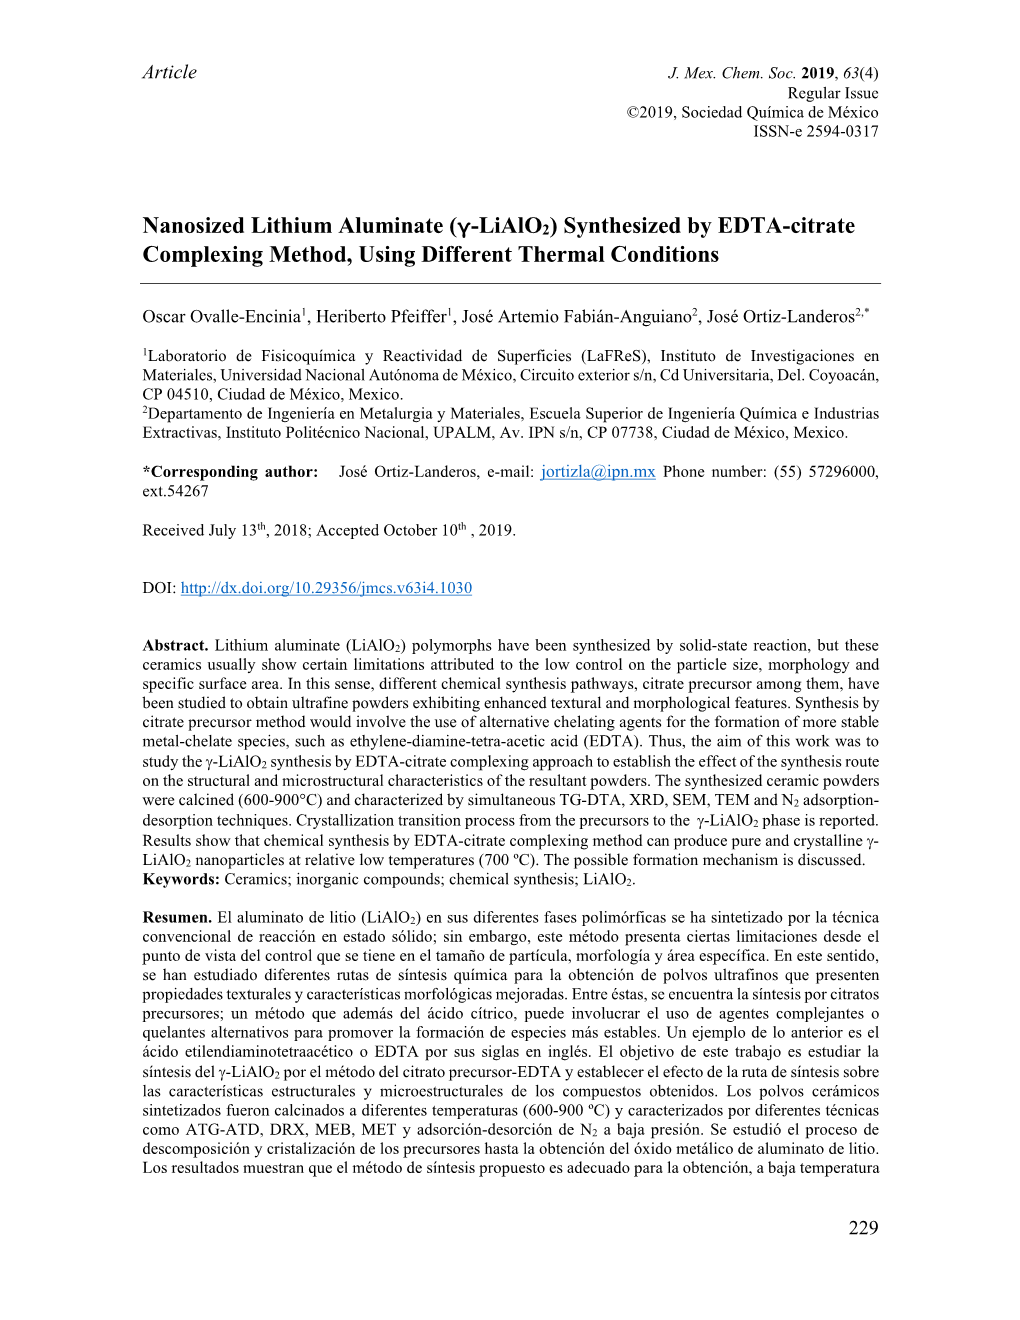 Nanosized Lithium Aluminate (Γ-Lialo2) Synthesized by EDTA-Citrate Complexing Method, Using Different Thermal Conditions